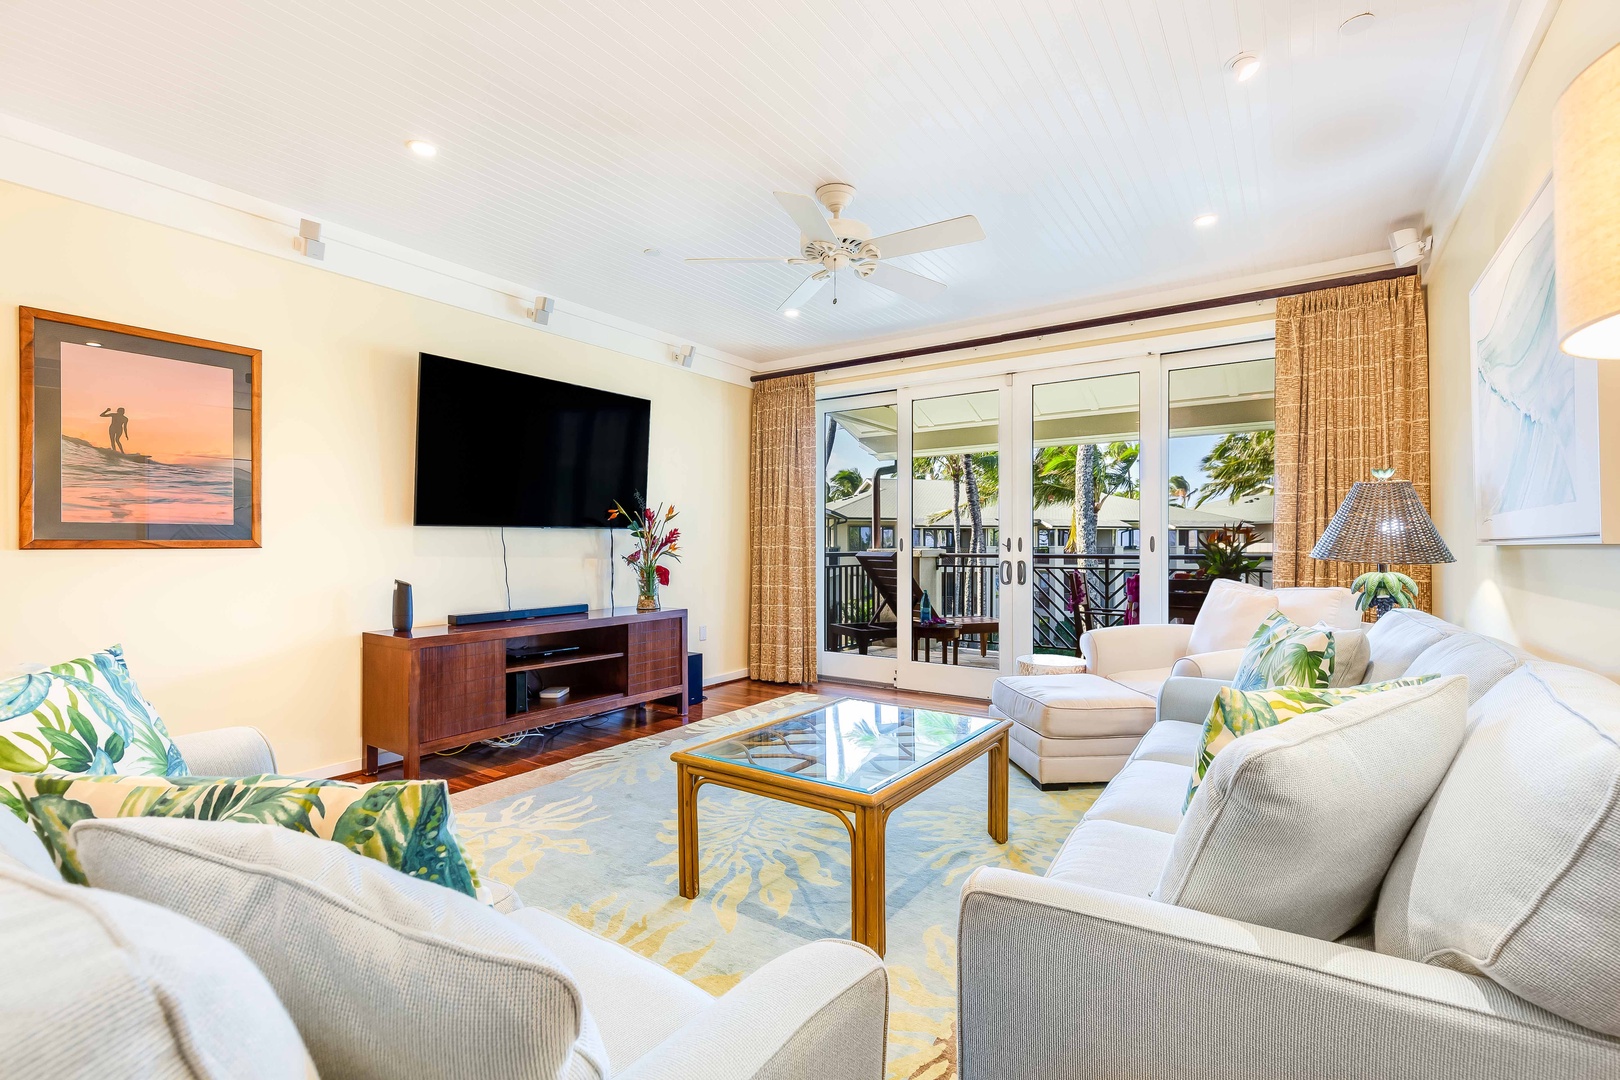 Kahuku Vacation Rentals, Turtle Bay Villas 313 - Living room has comfy couches and a big tv